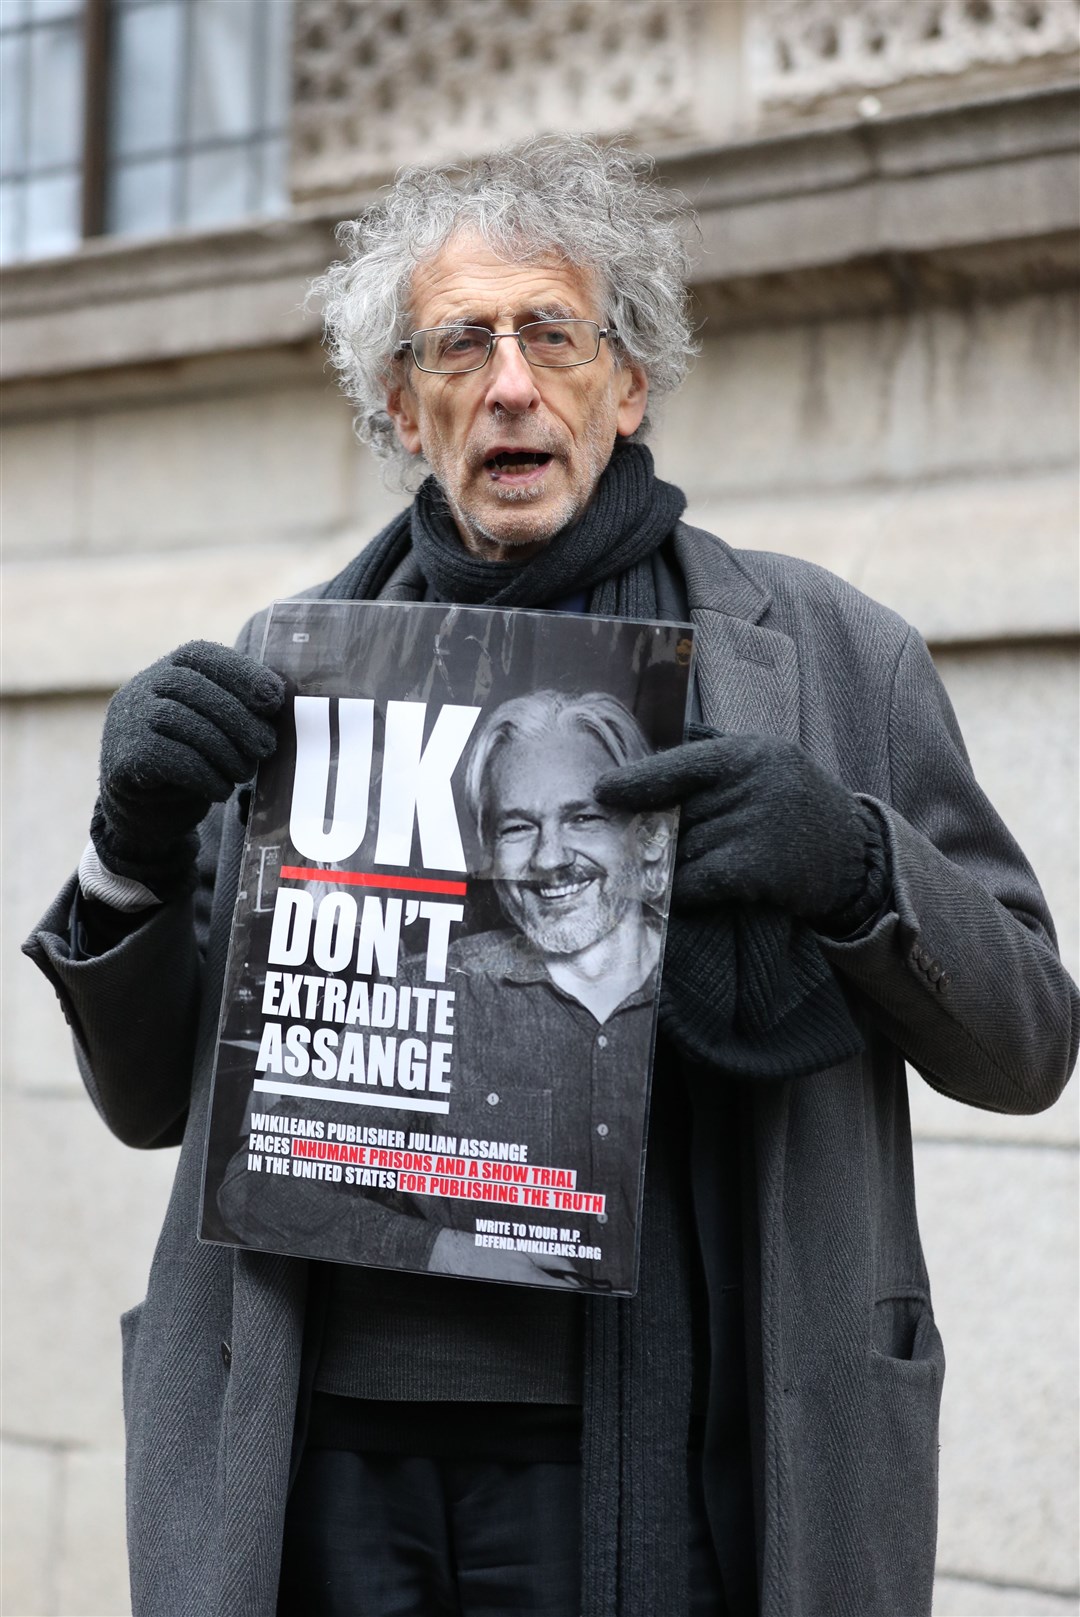 Piers Corbyn holds up a poster in support of Julian Assange outside the Old Bailey, London (Yui Mok/PA)